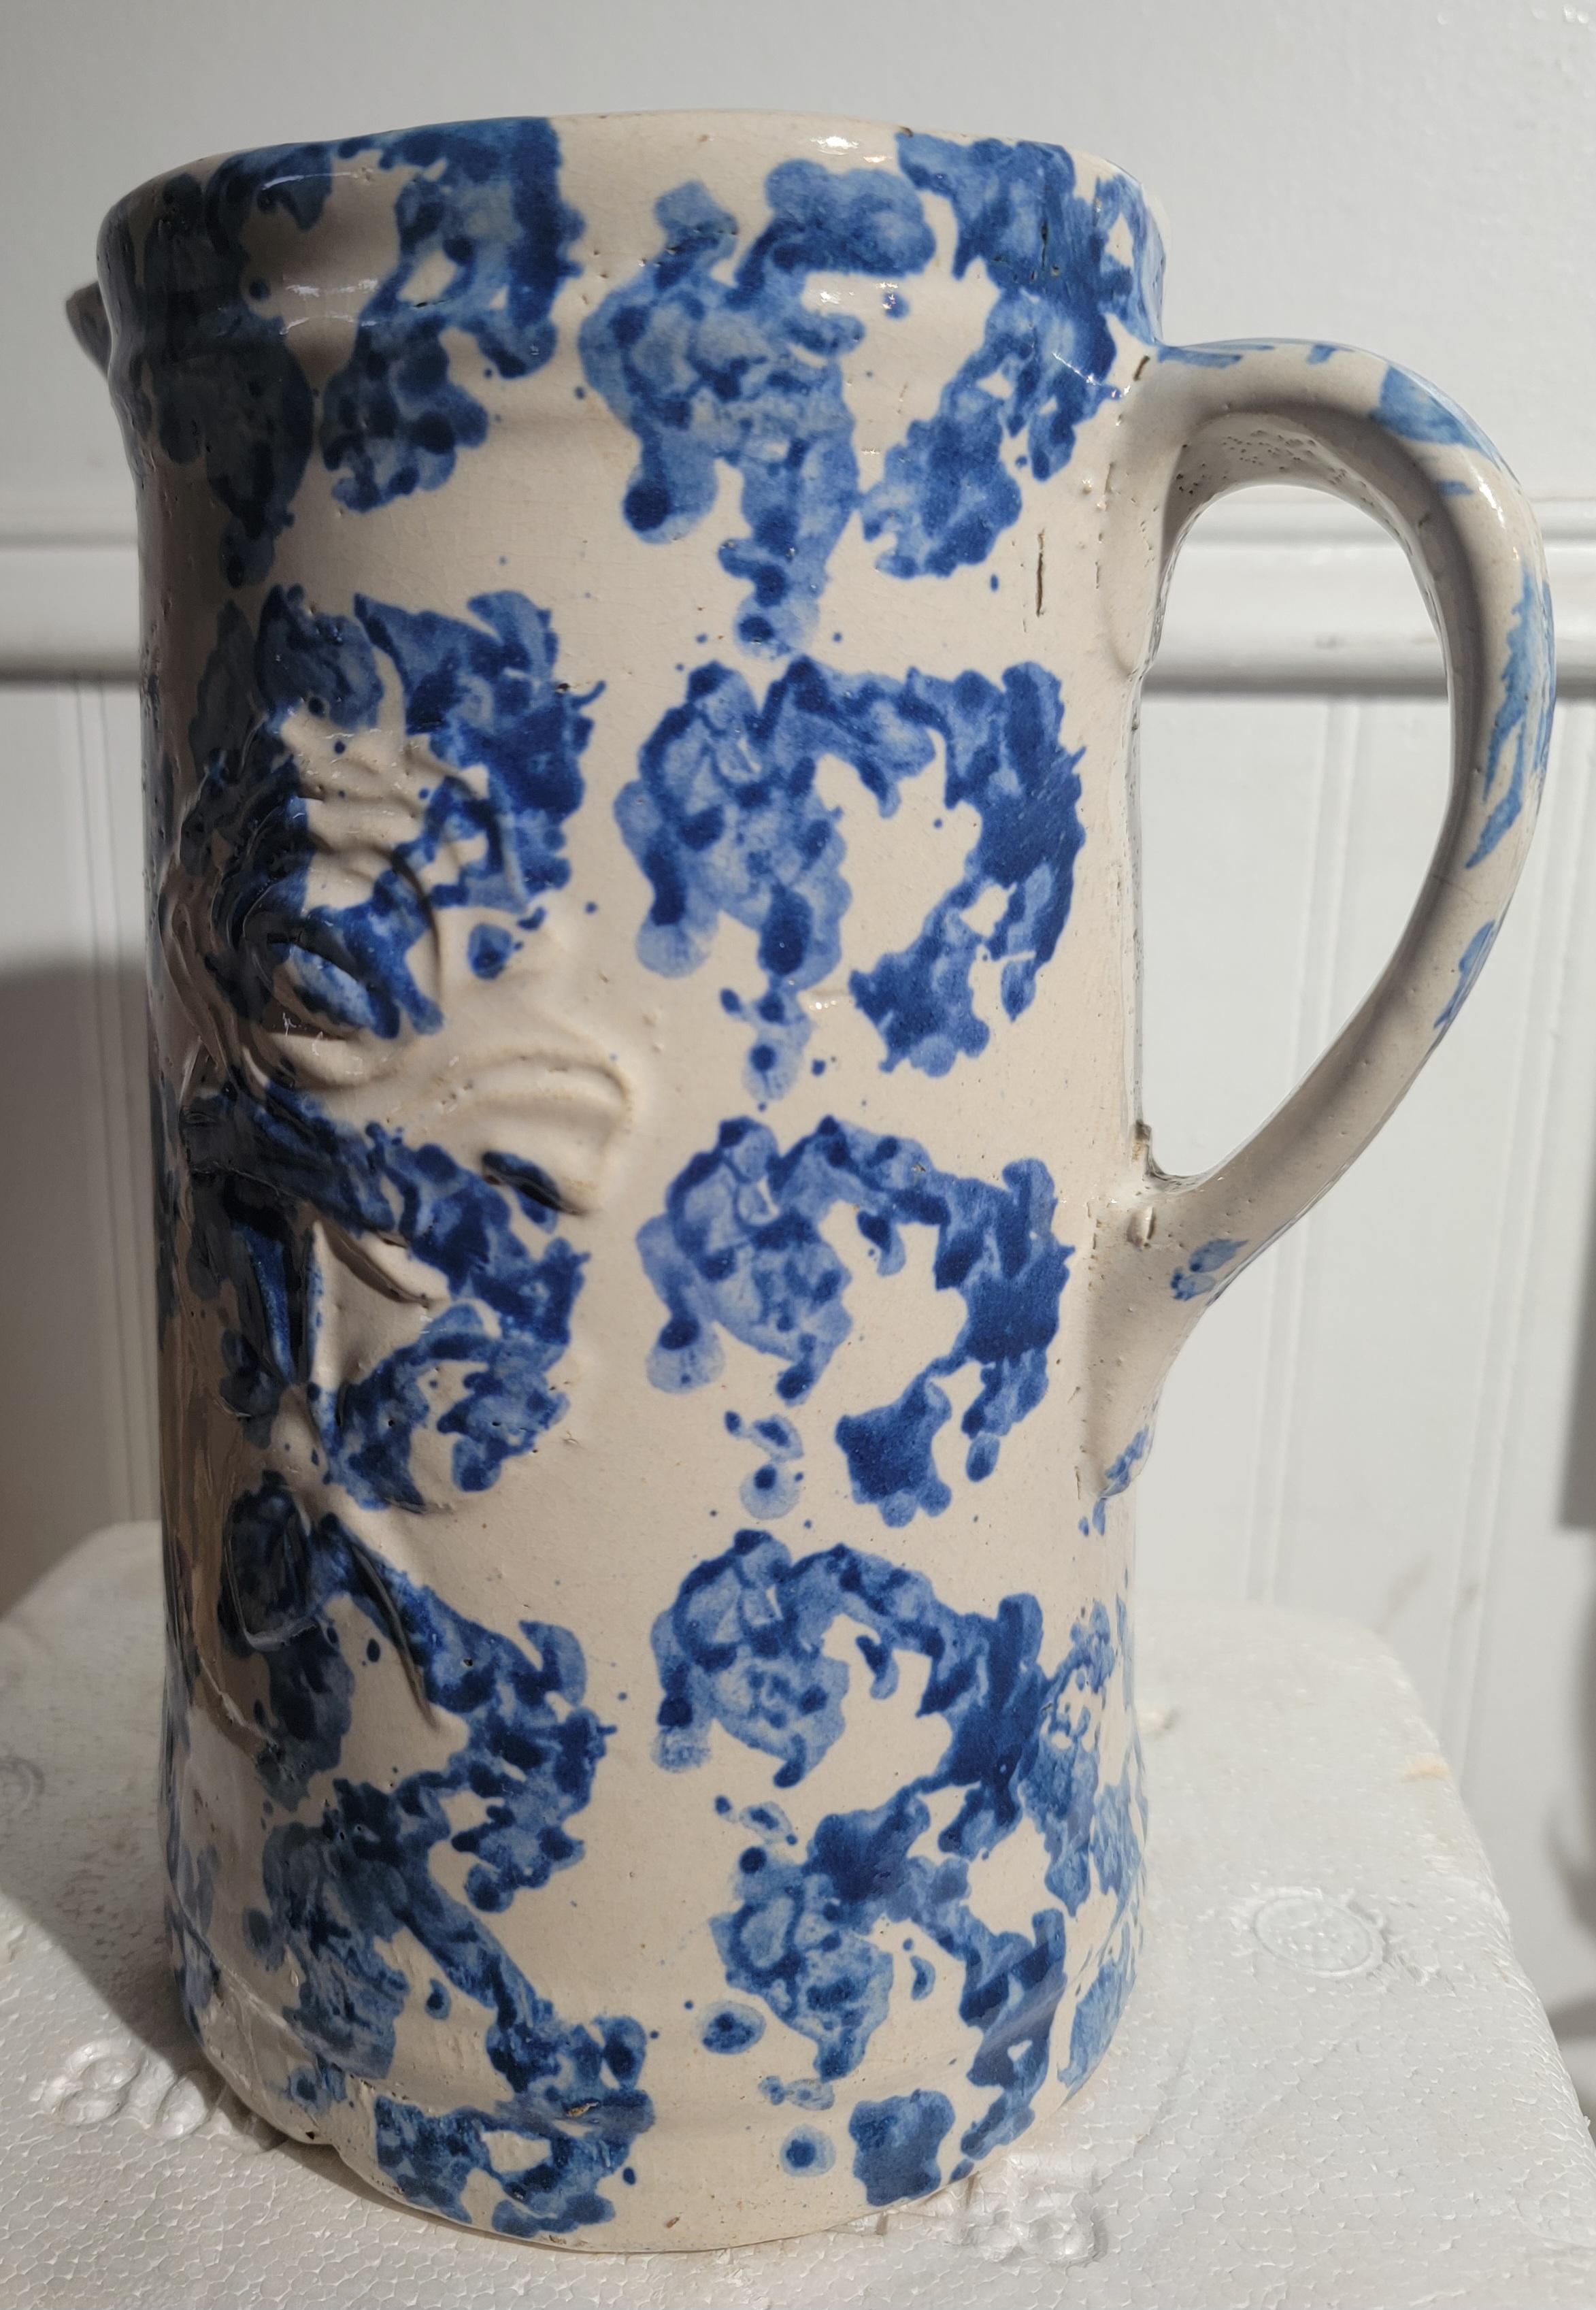 19thc Sponge ware with smoke ring pattern in blue and white. Tall pitcher in great condition. Great wear from age and use.  The flower design is on both side of the pitcher with great texture.